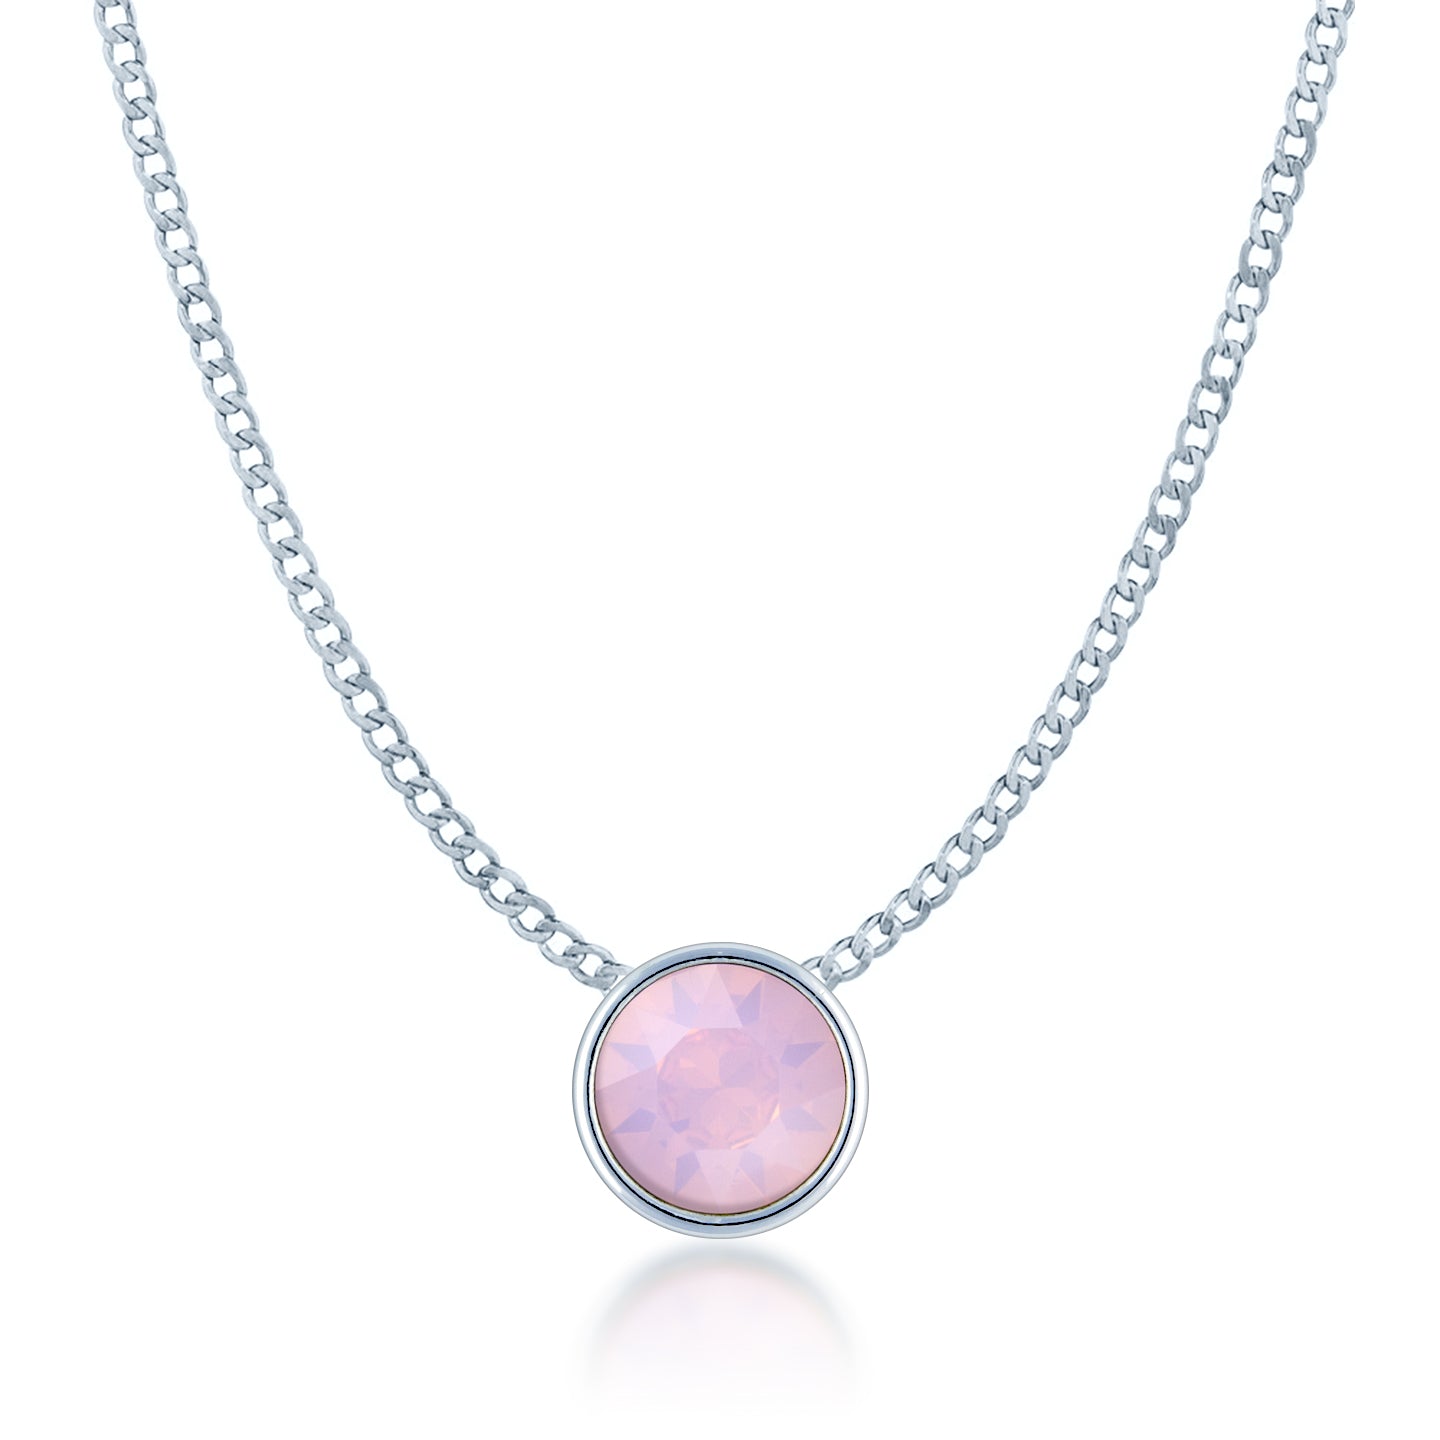 Harley Small Pendant Necklace with Pink Rose Water Round Opals from Swarovski Silver Toned Rhodium Plated - Ed Heart